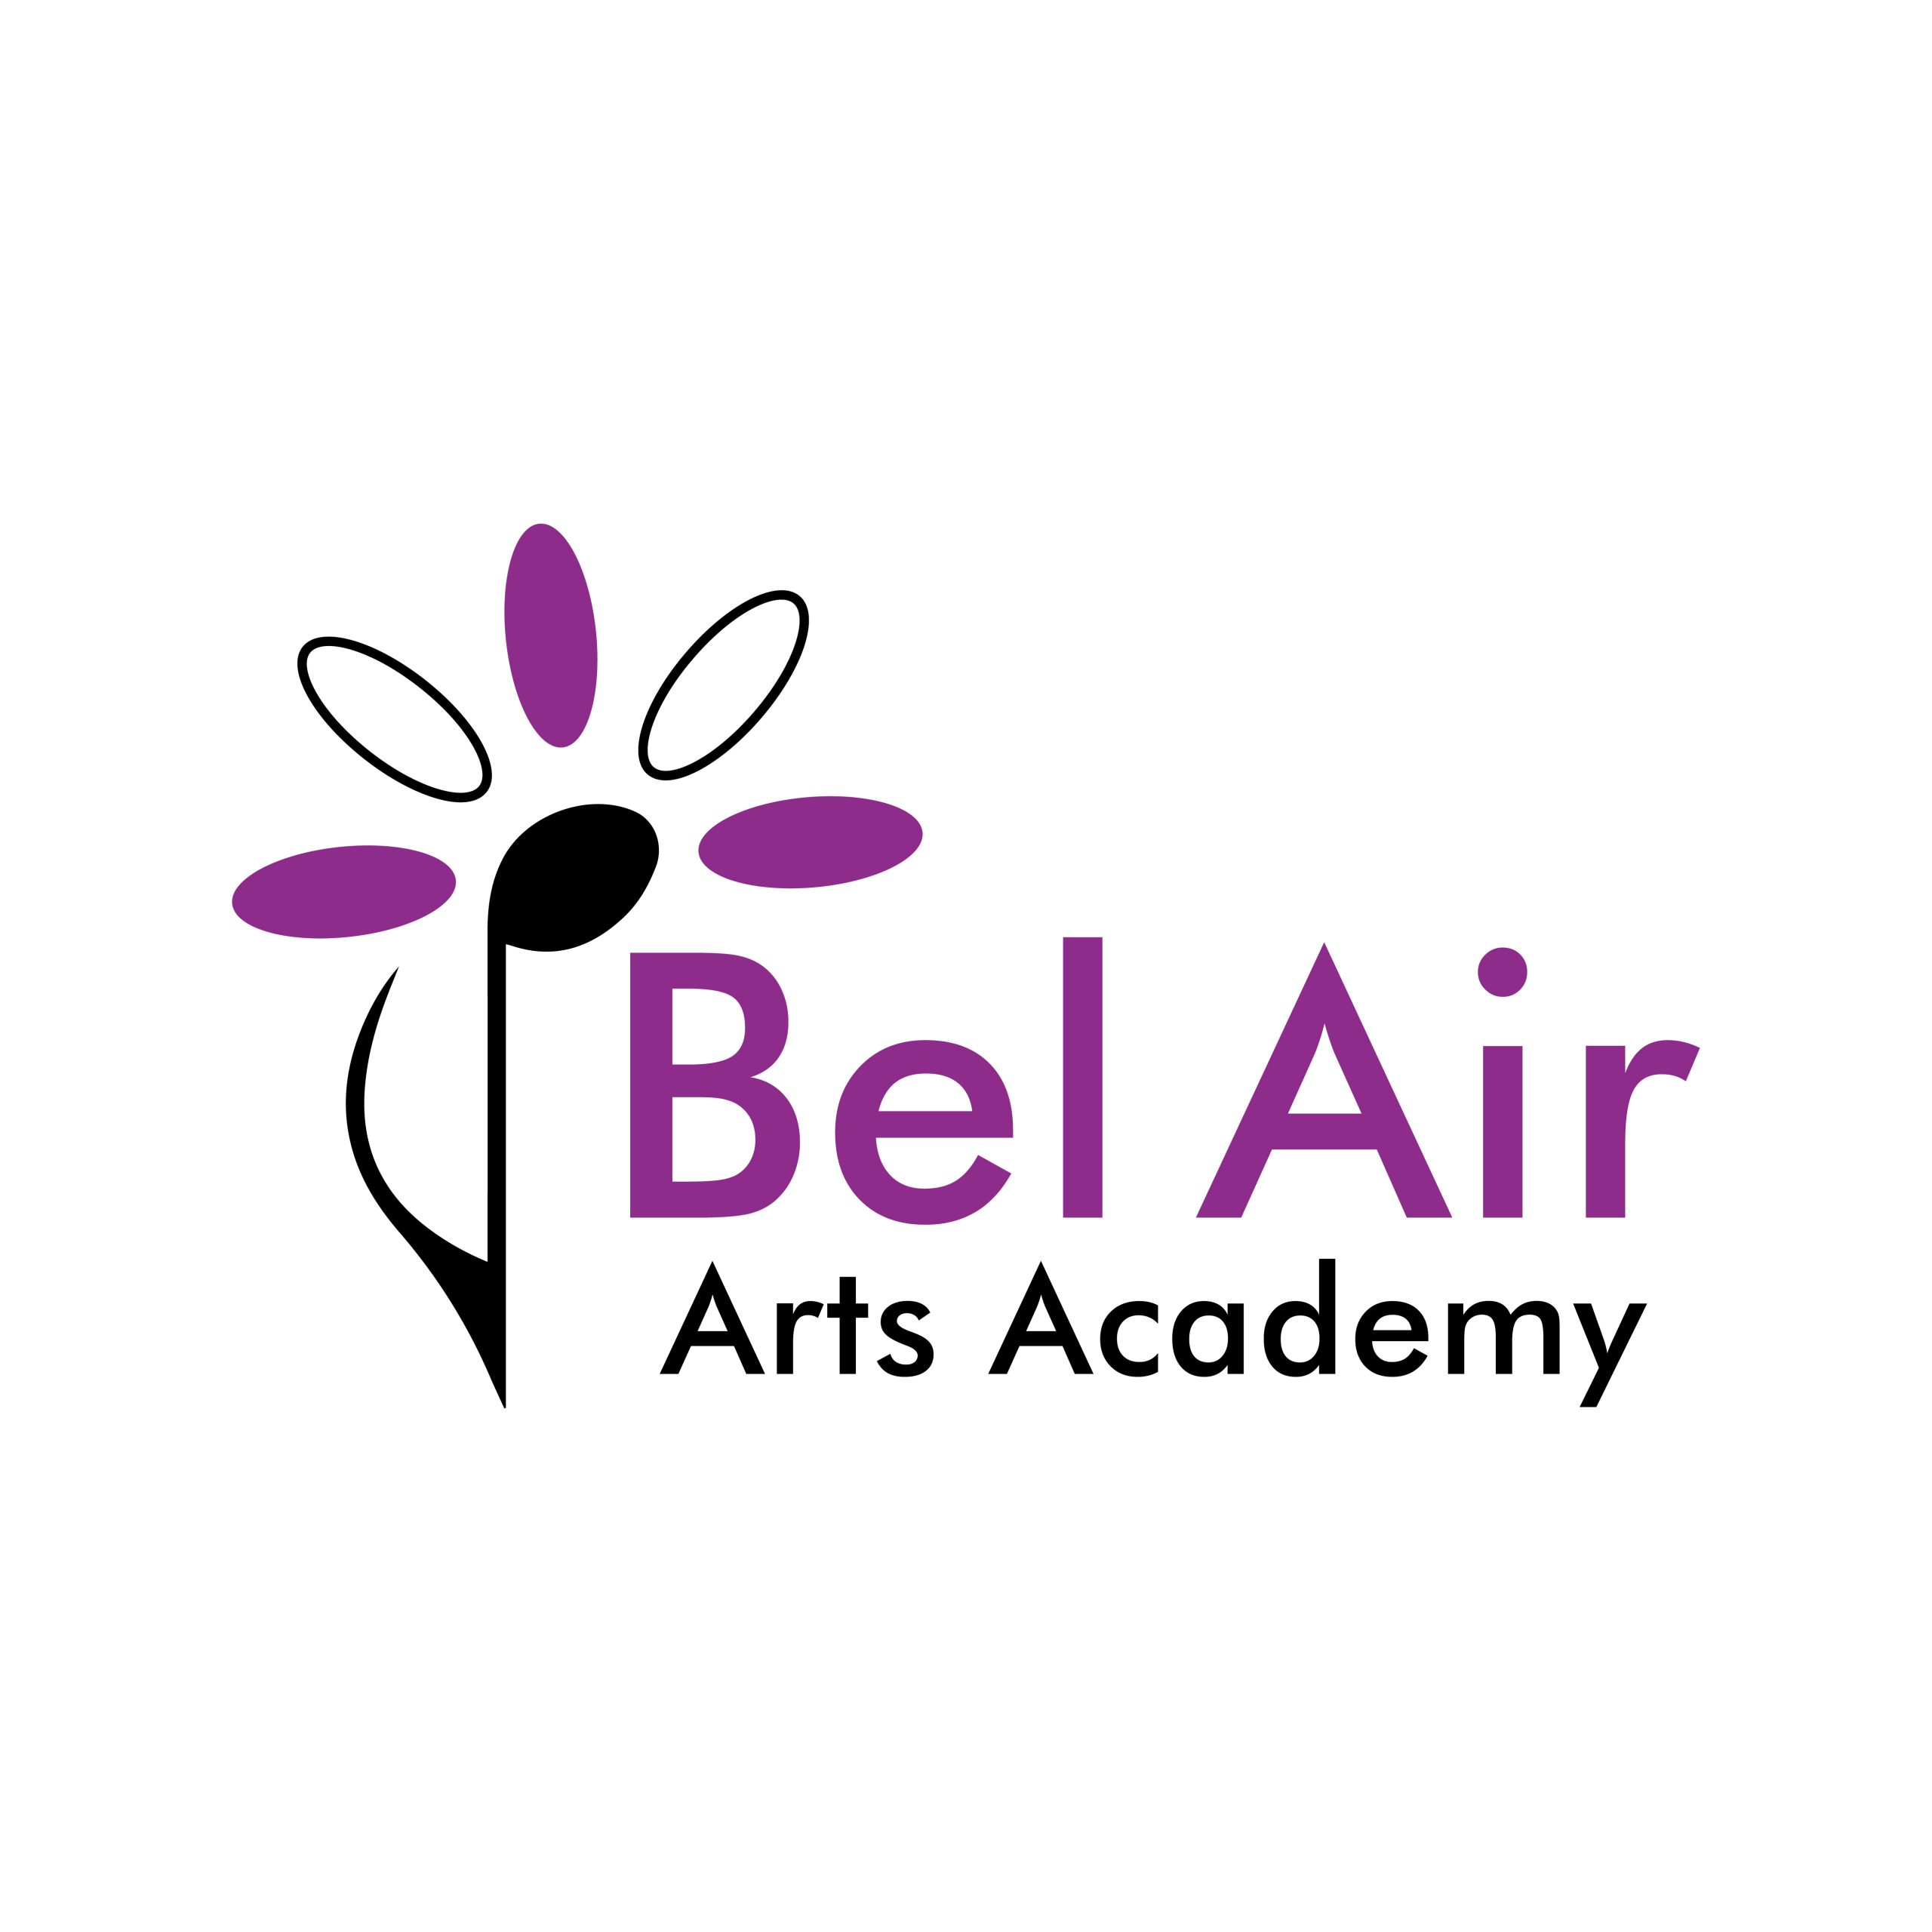 The Bel Air Arts Academy